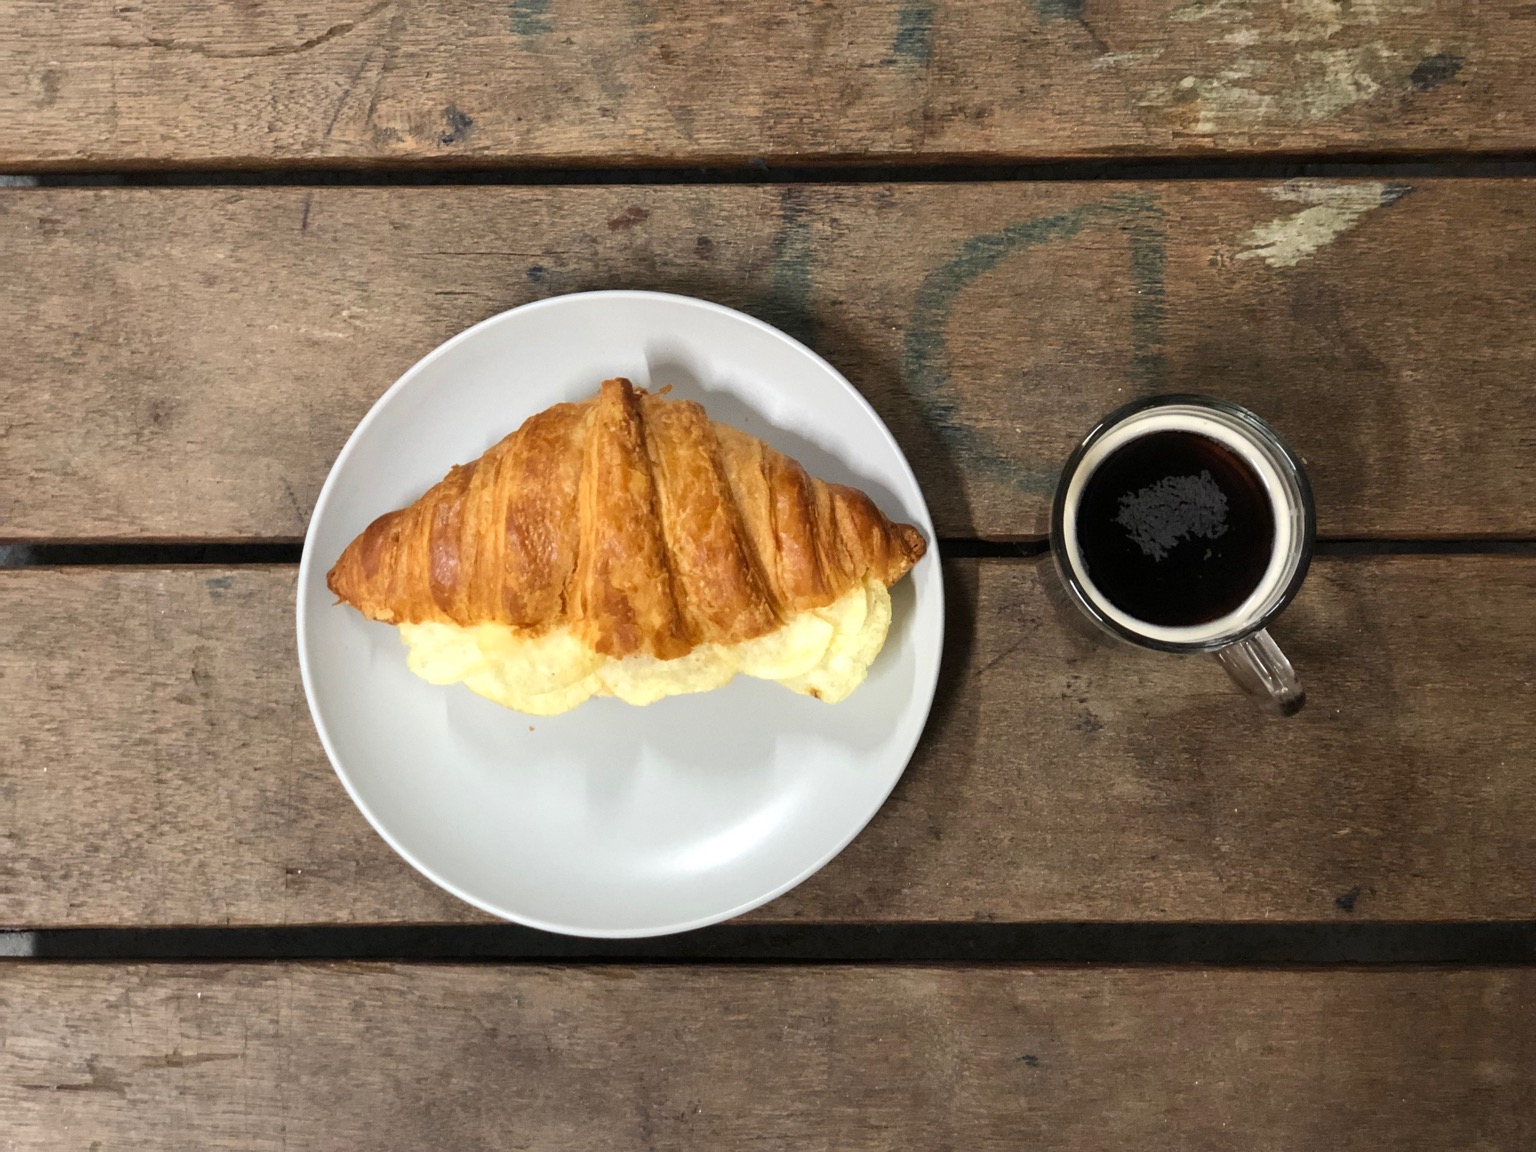 Overhead view of crisp croissant and drink